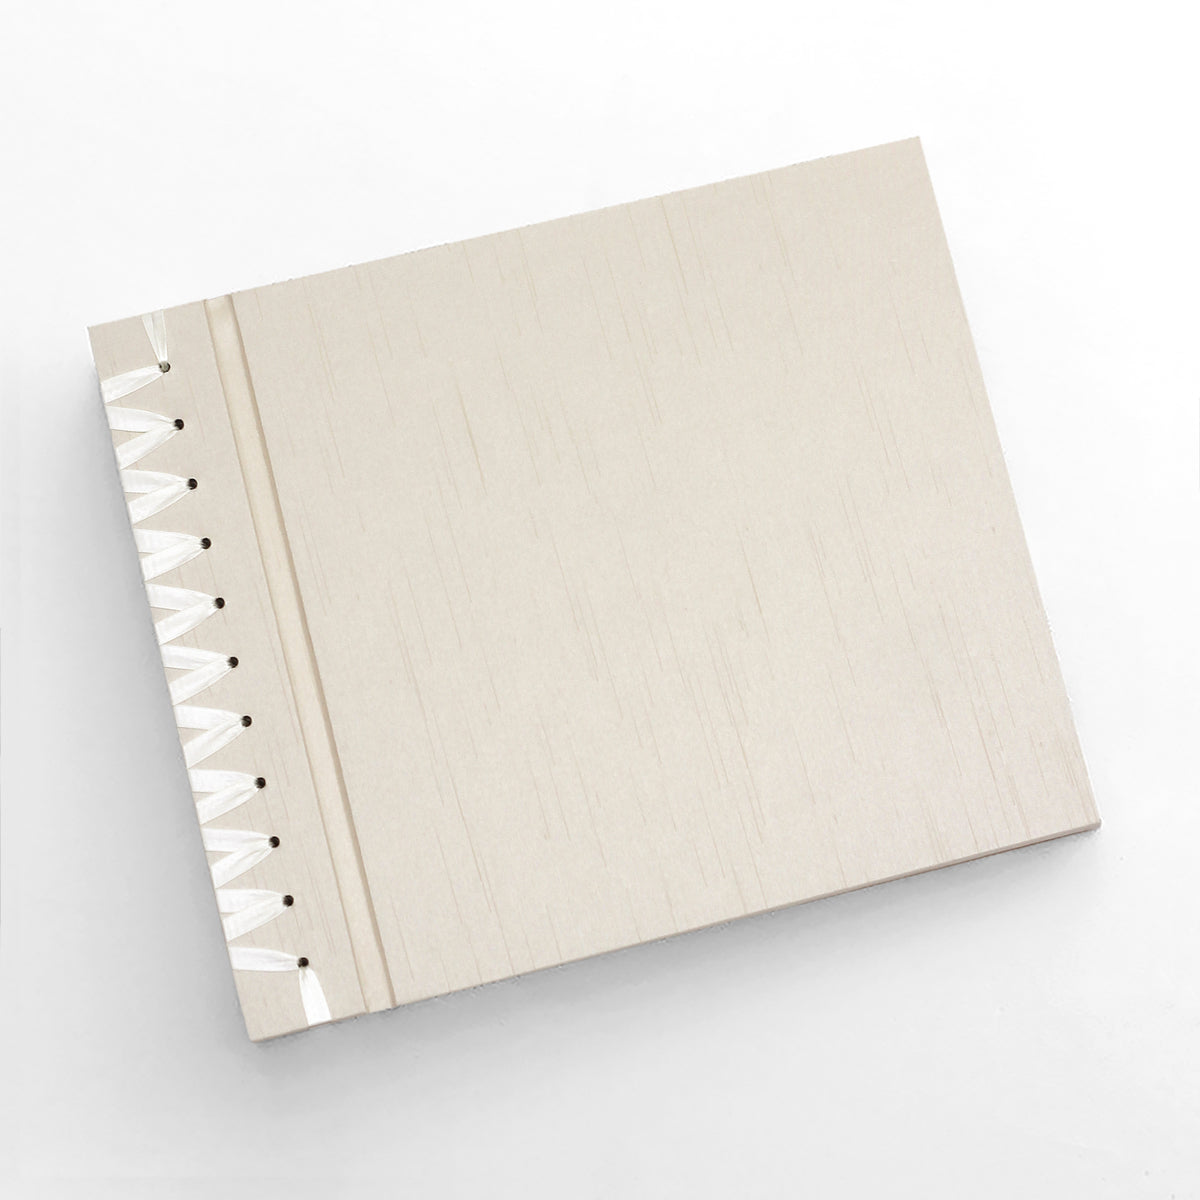 Deluxe 12 x 15 Paper Page Album | Cover: Champagne Silk | Available Personalized